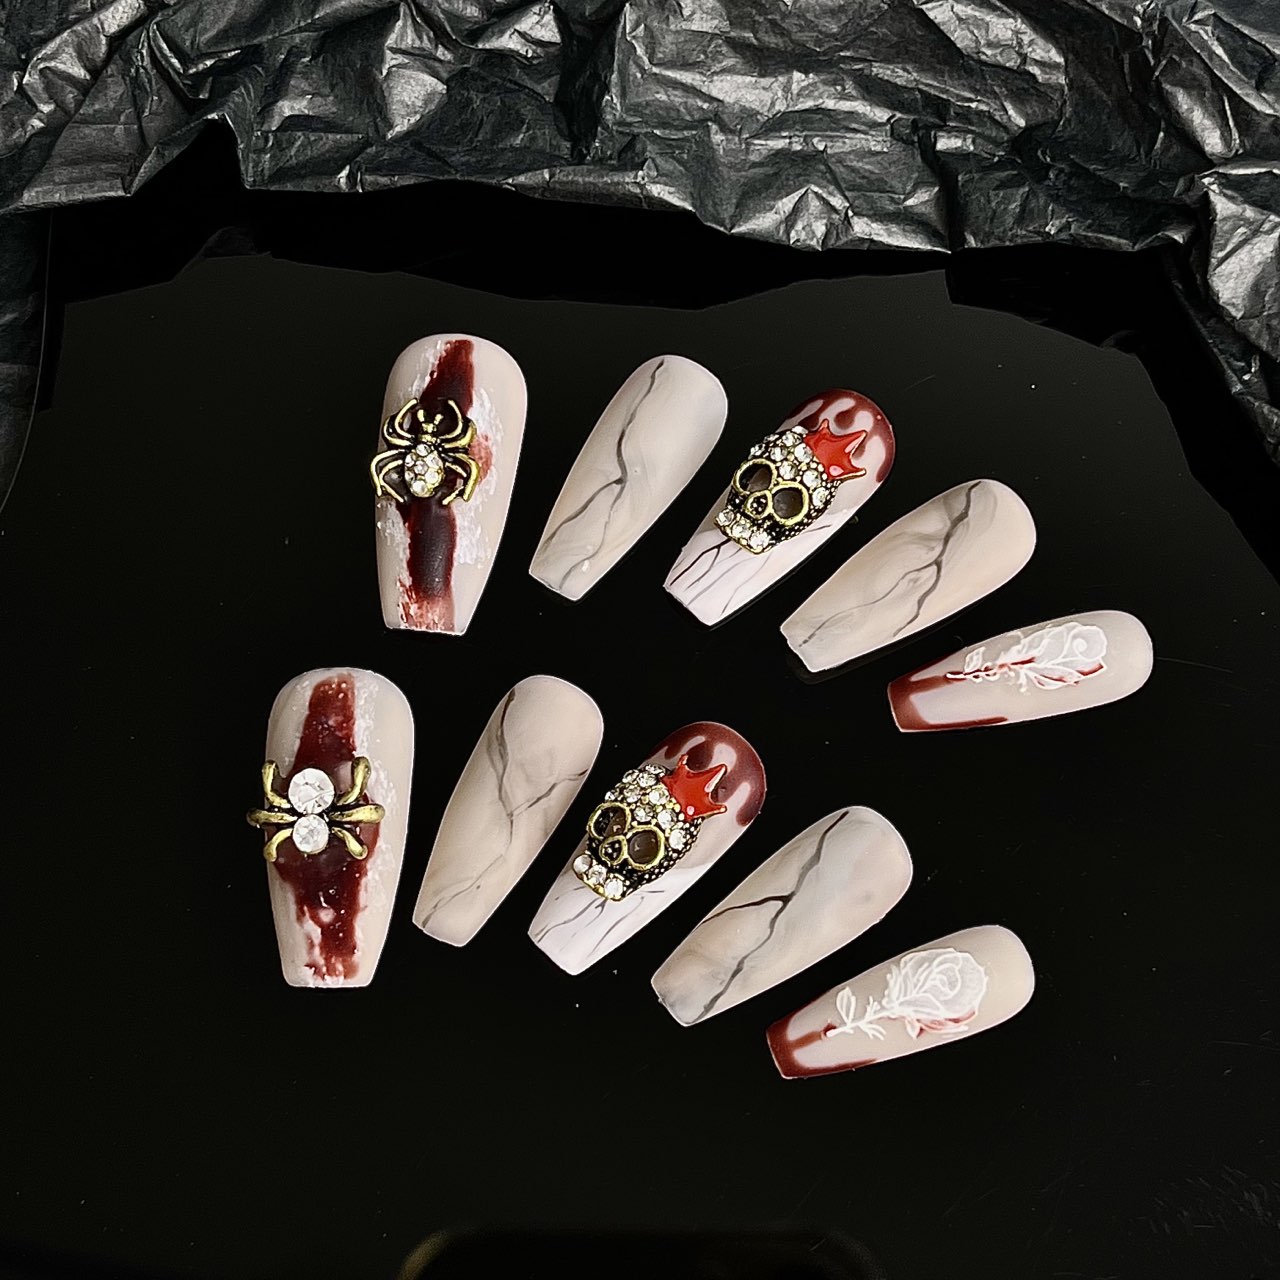 A group of Maramalive™ Gothic Halloween Wear Armor Three-dimensional Spider Nails with blood on them.